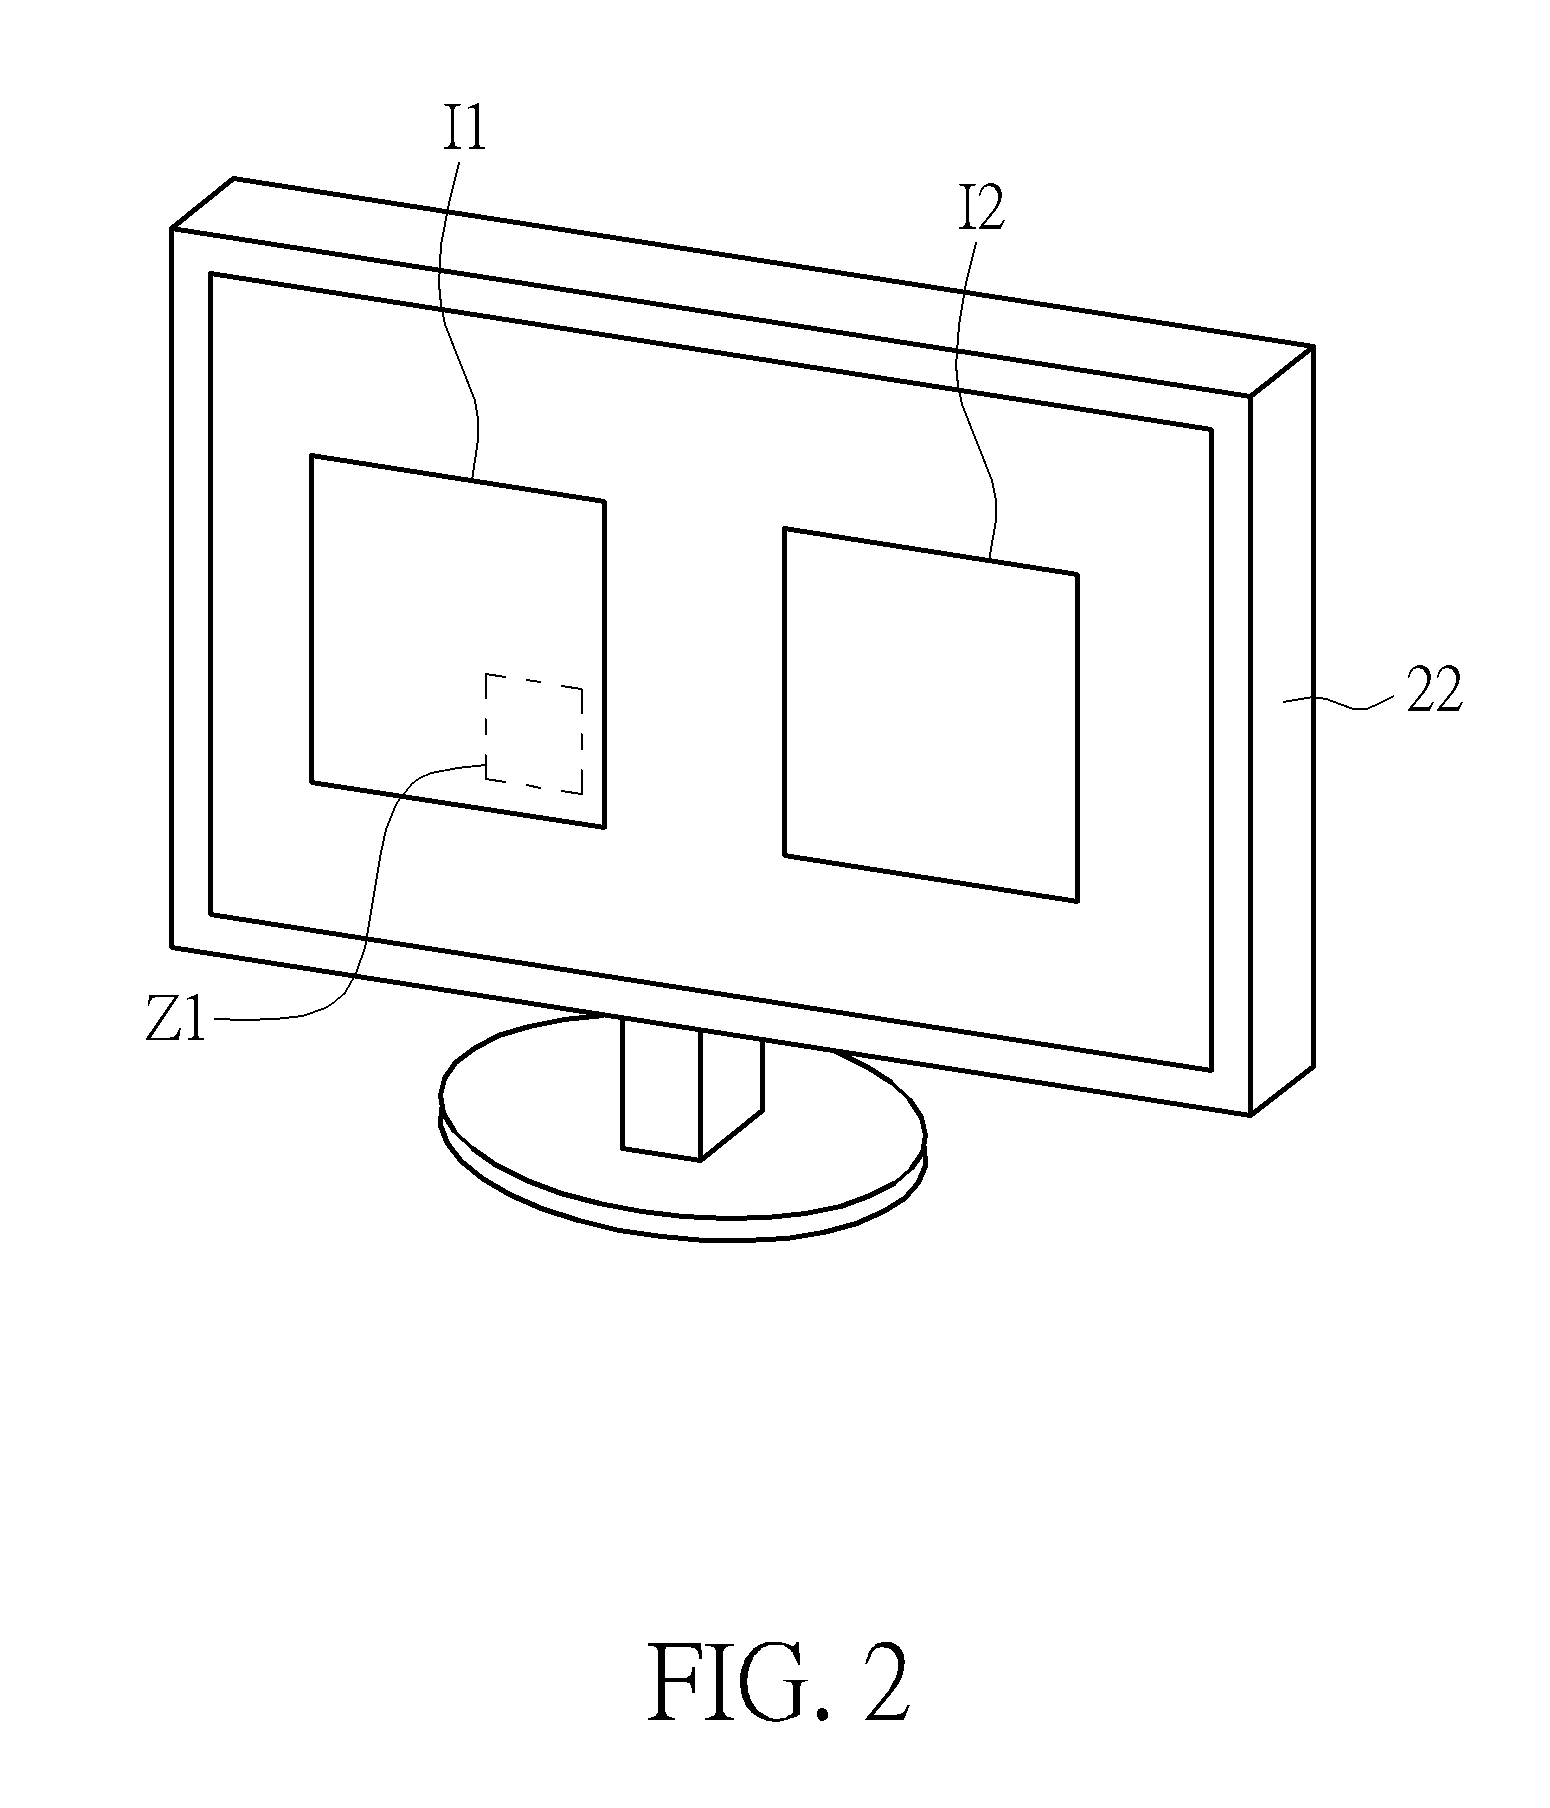 Camera system with a full view monitoring function